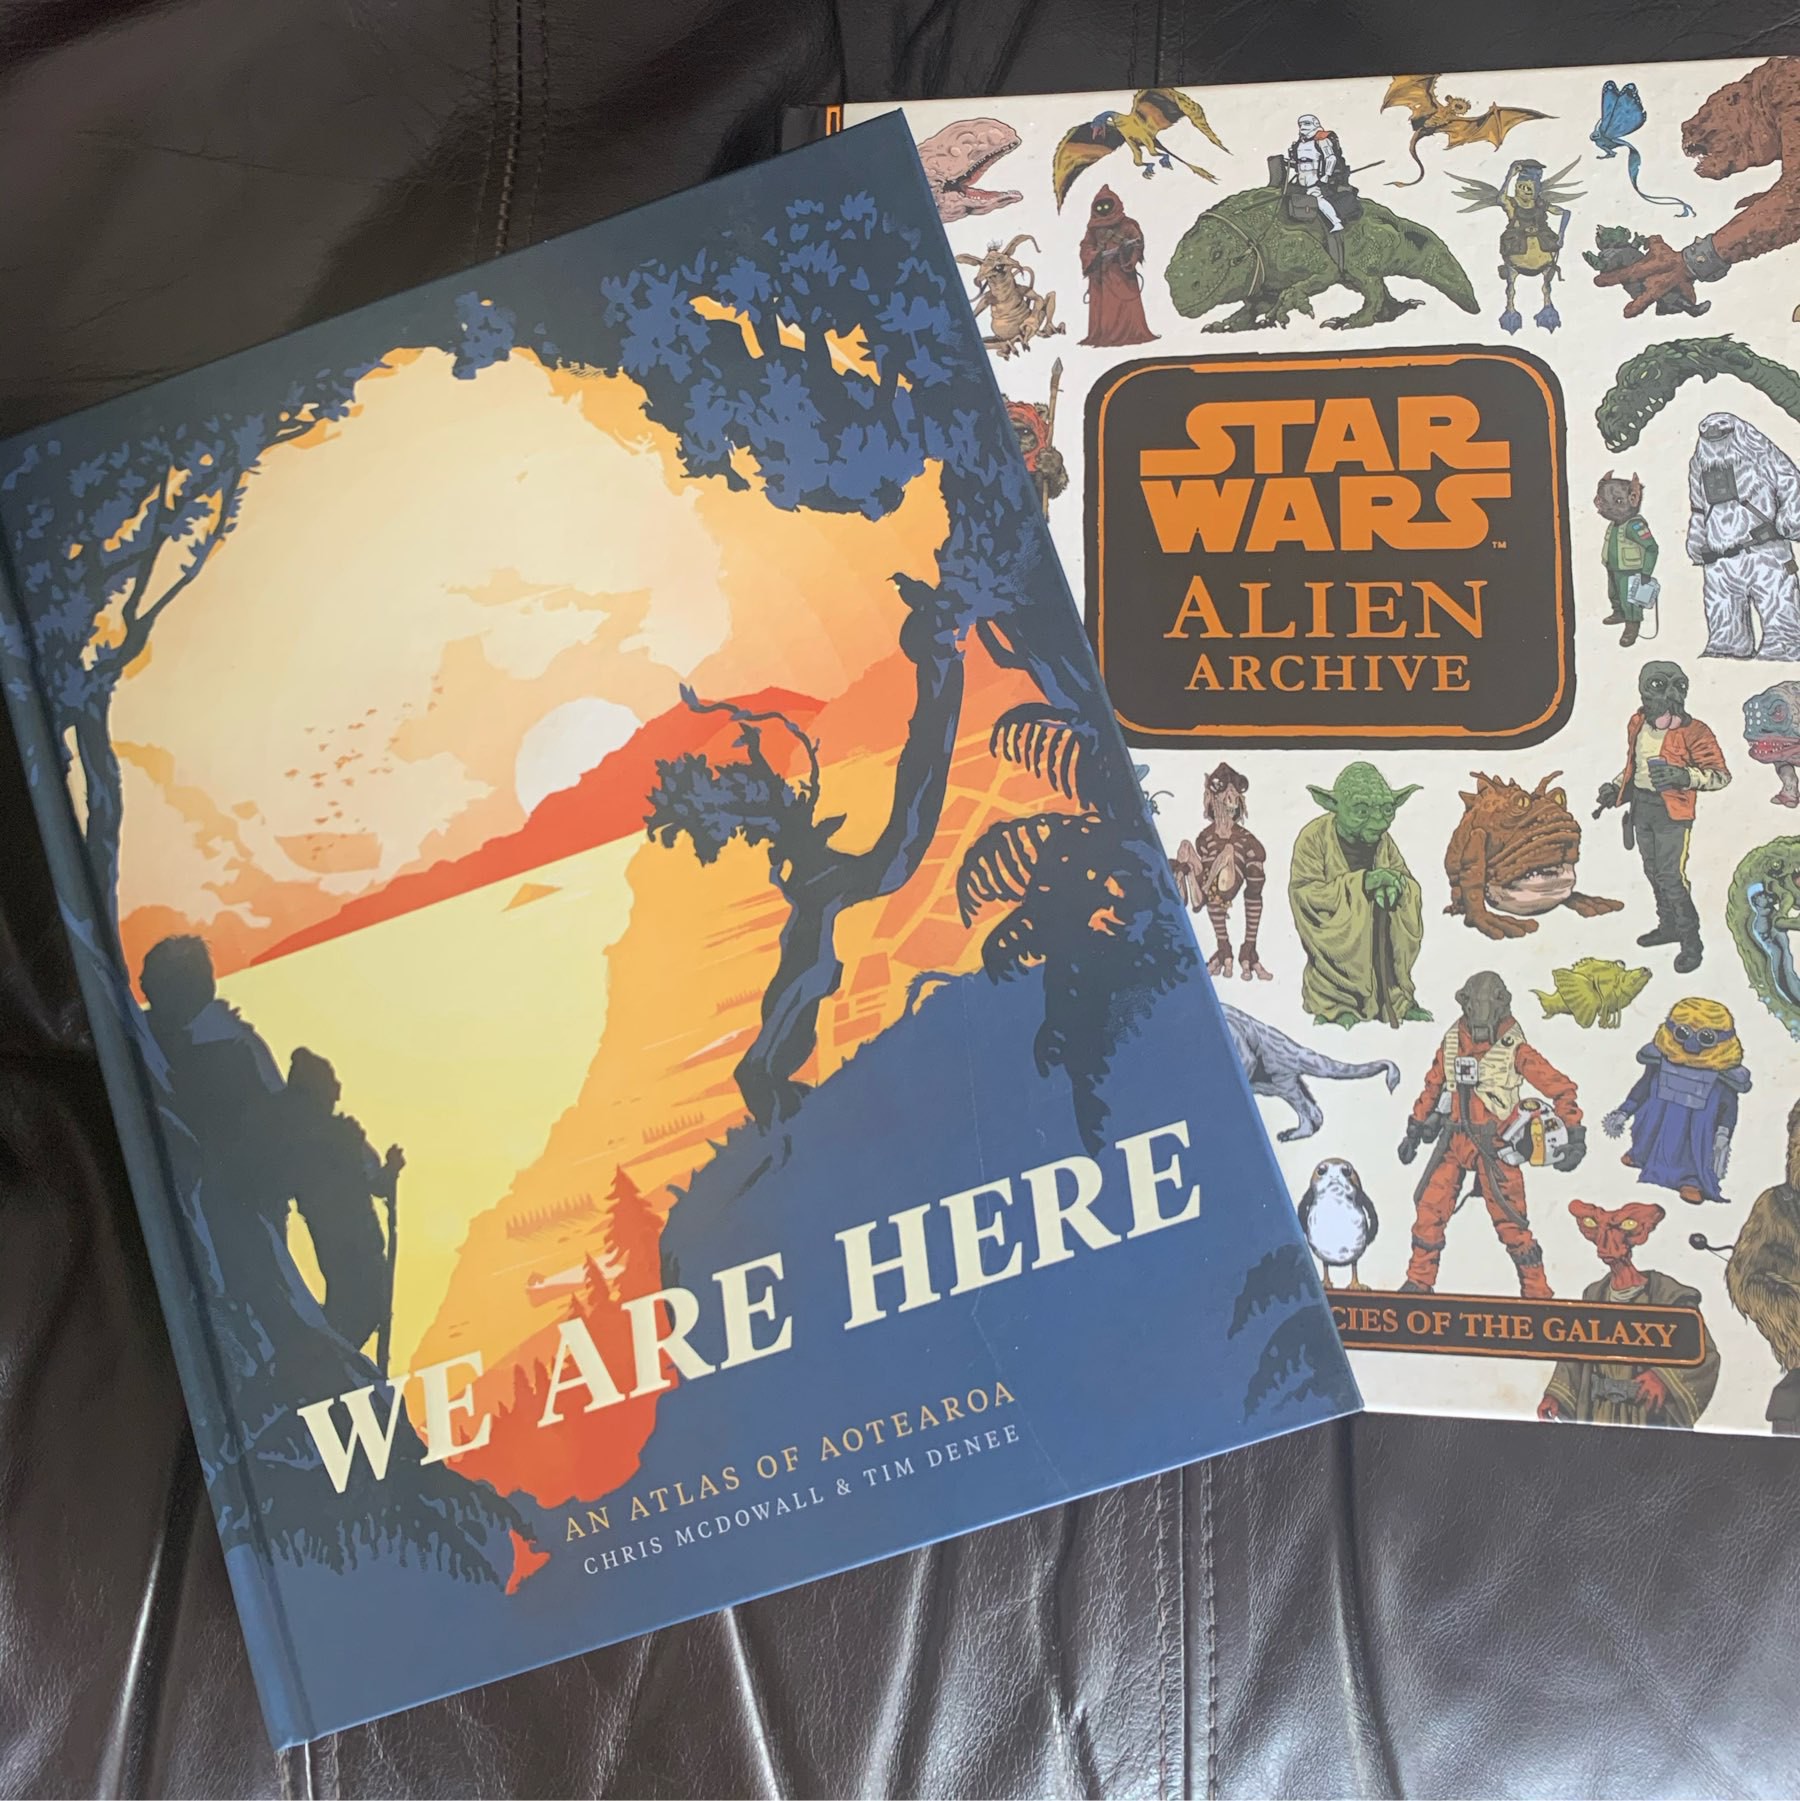 The Star Wars Alien Archive and We Are Here, a infographic atlas of Aoteatoa